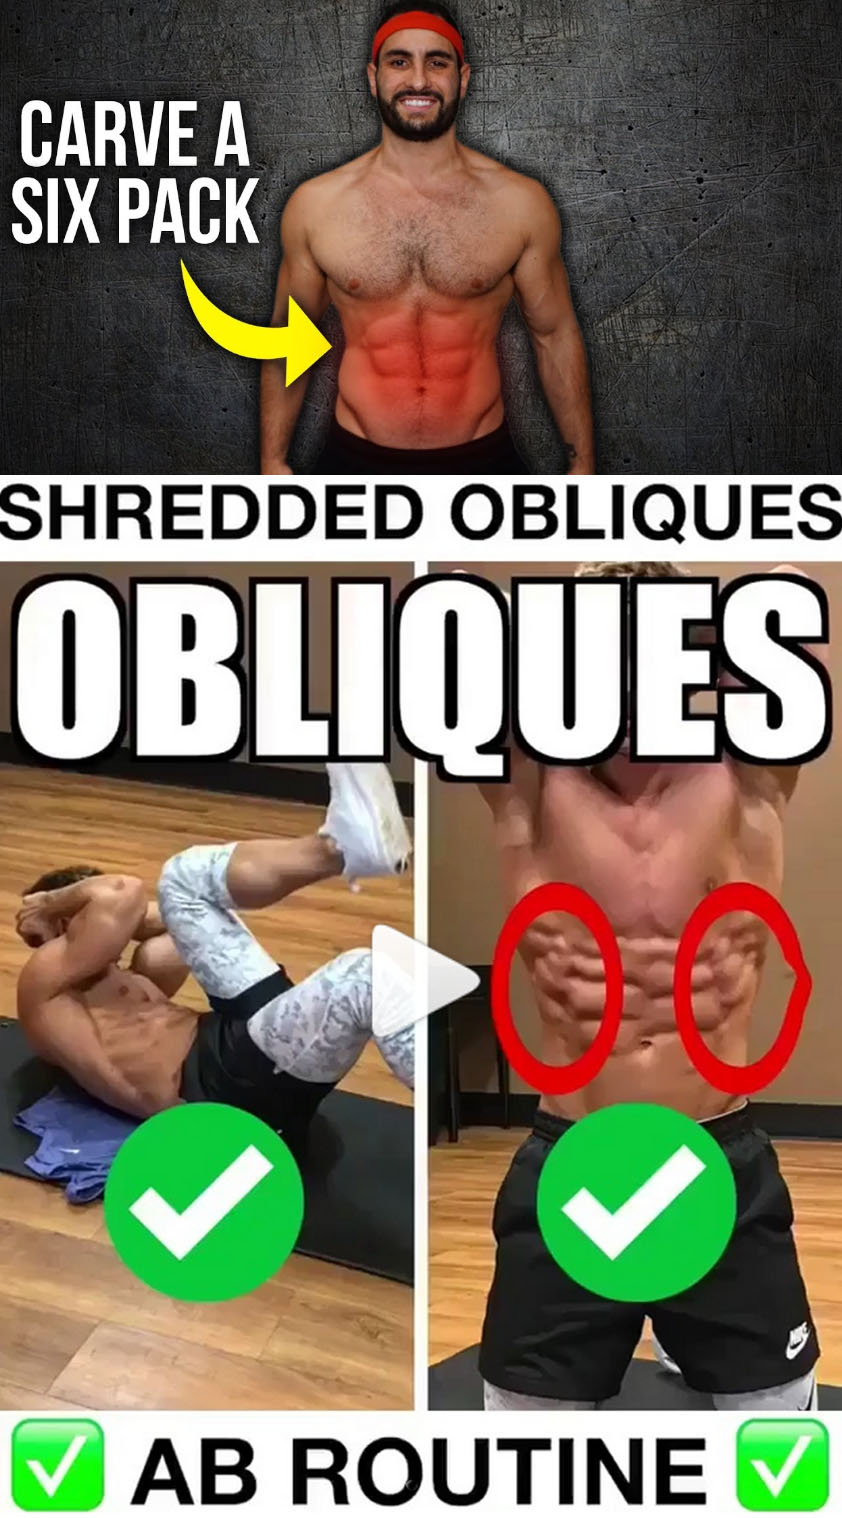 Shredded Obliques Routine